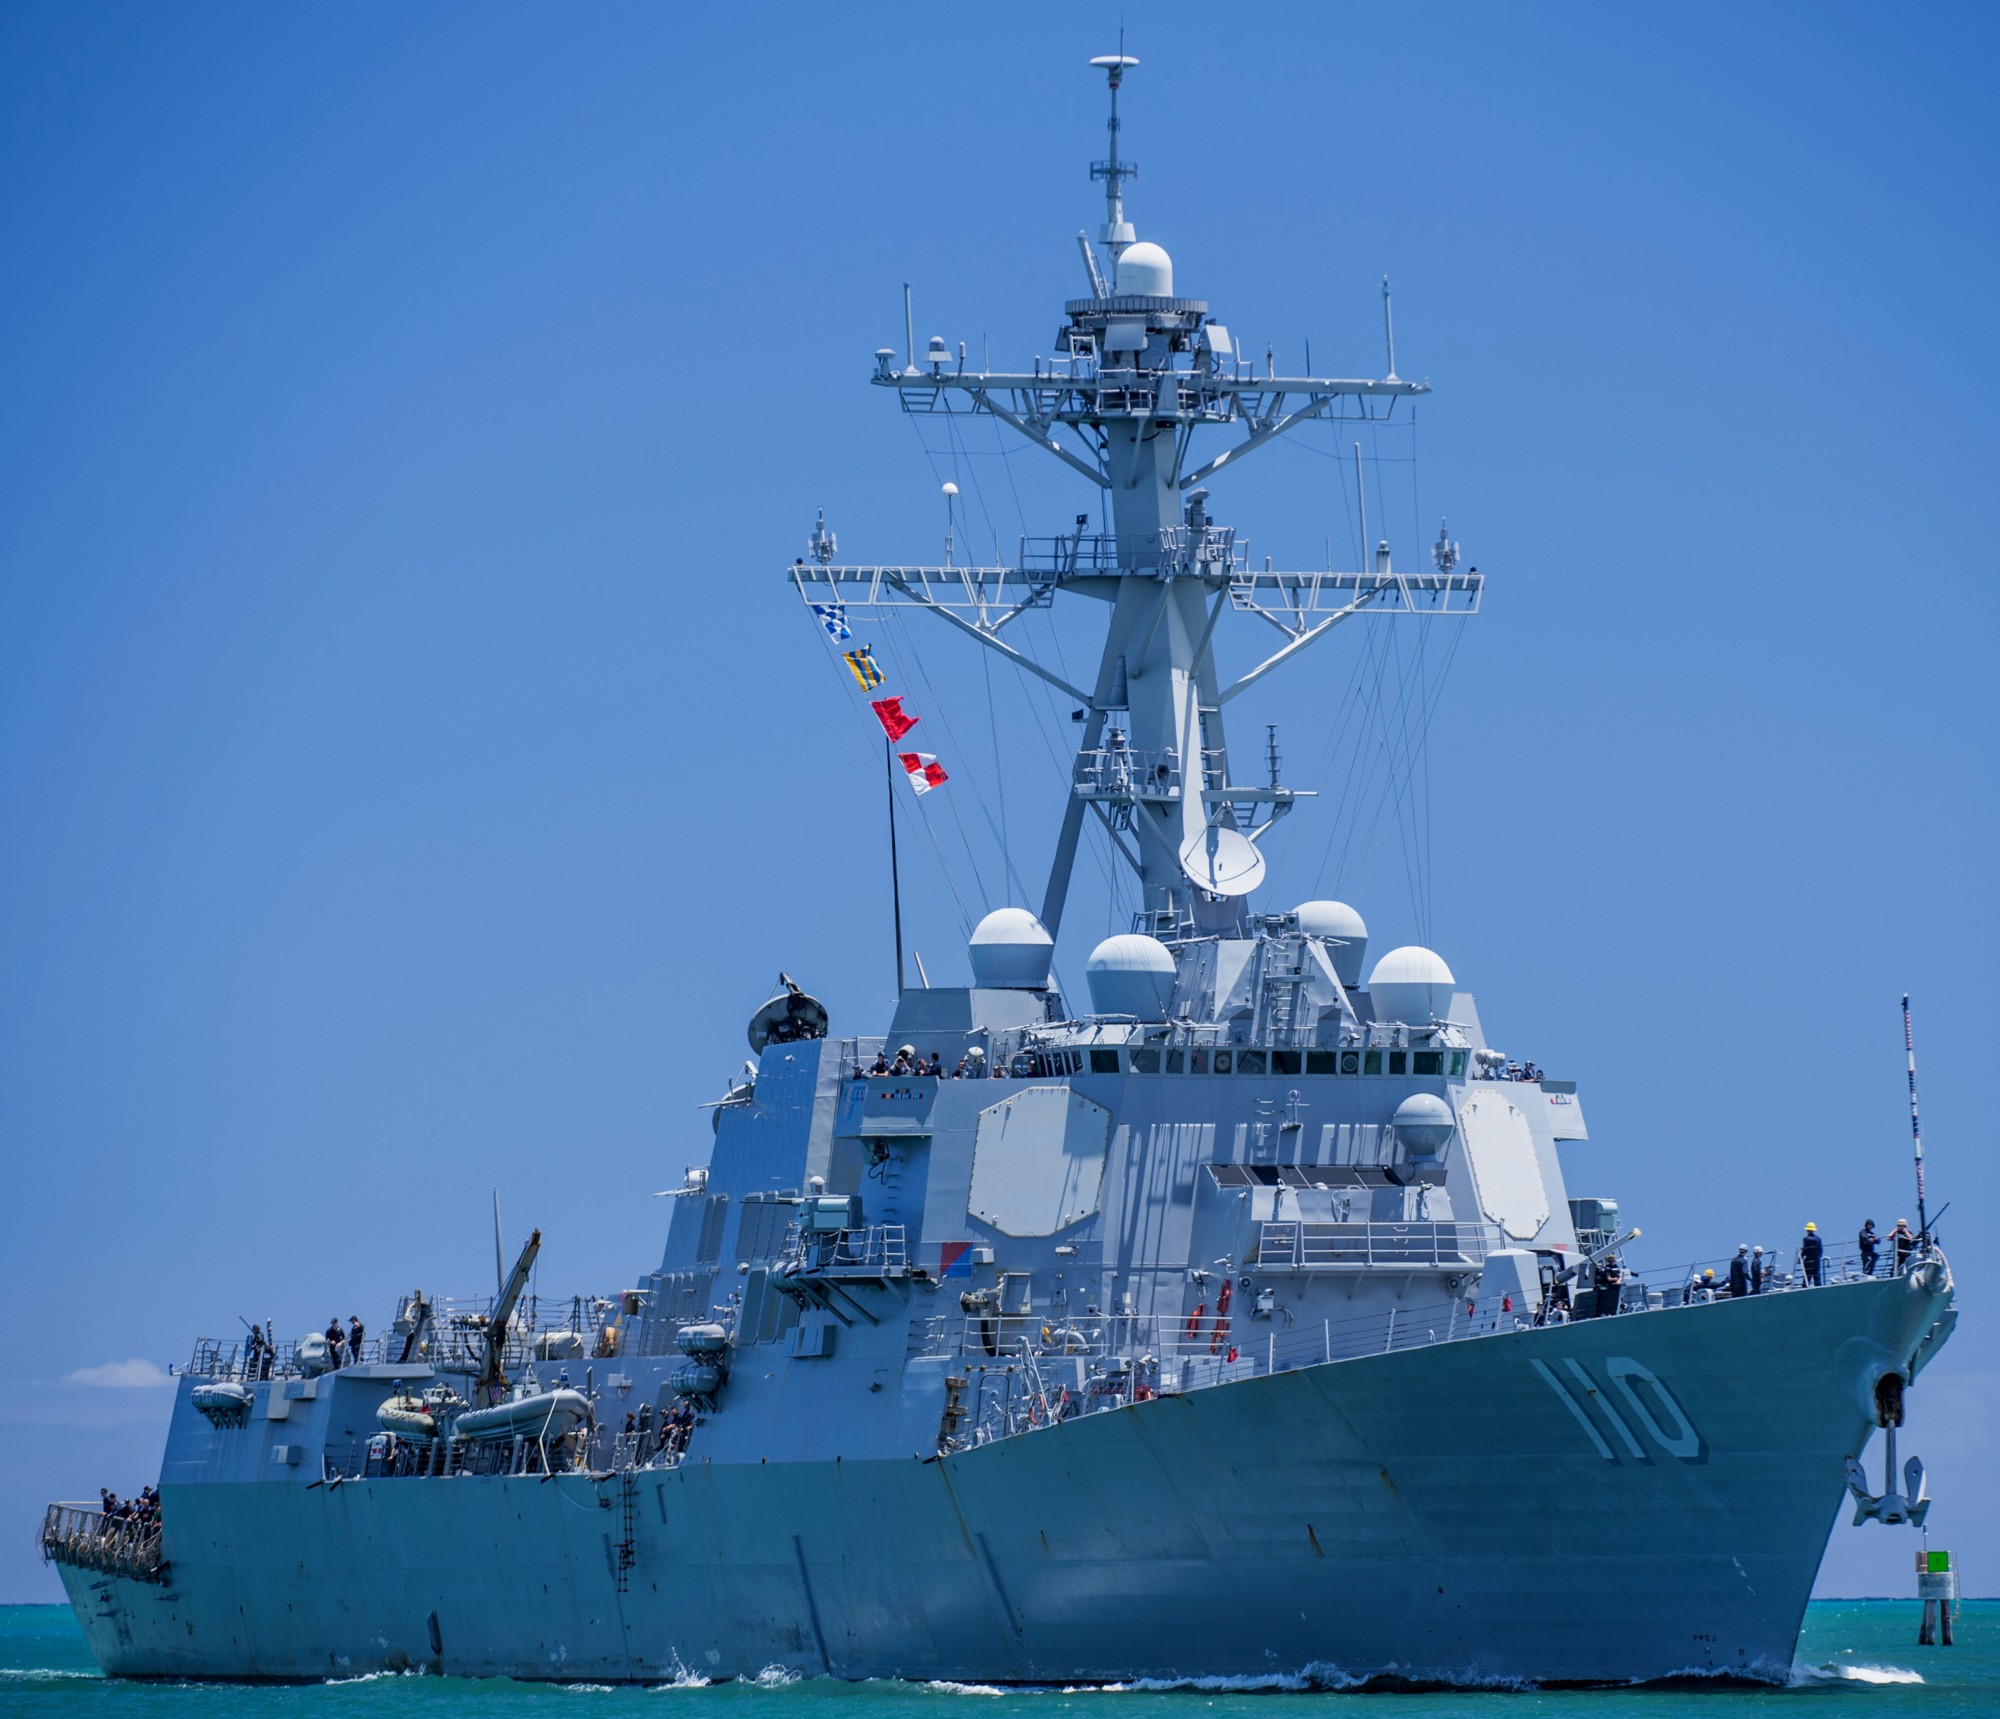 ddg-110 uss william p. lawrence arleigh burke class guided missile destroyer aegis us navy pearl harbor hickam hawaii 32